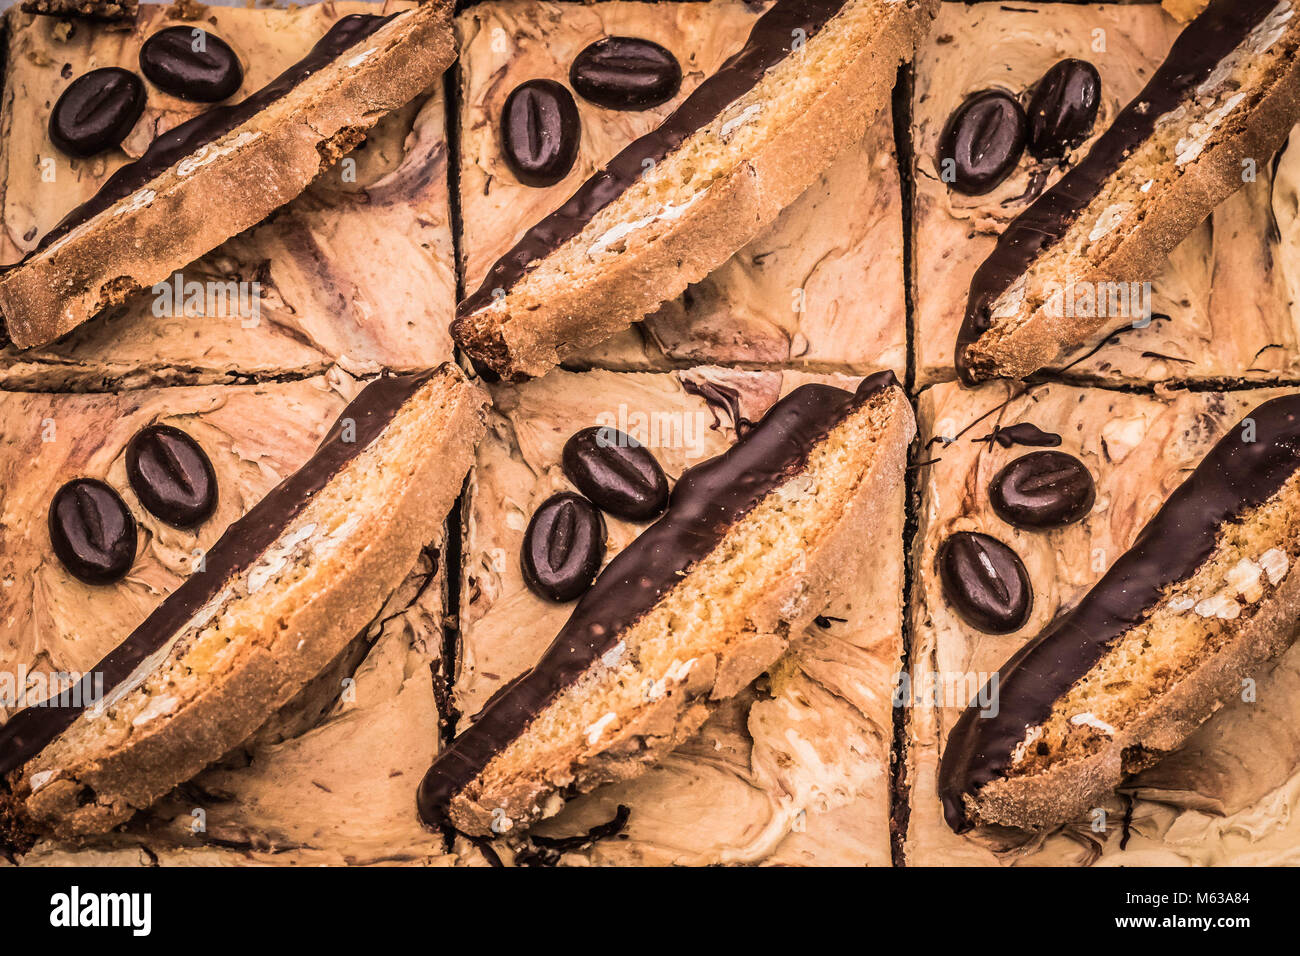 Coffee Chocolate brownies at Maltby Street Market, London UK Stock Photo